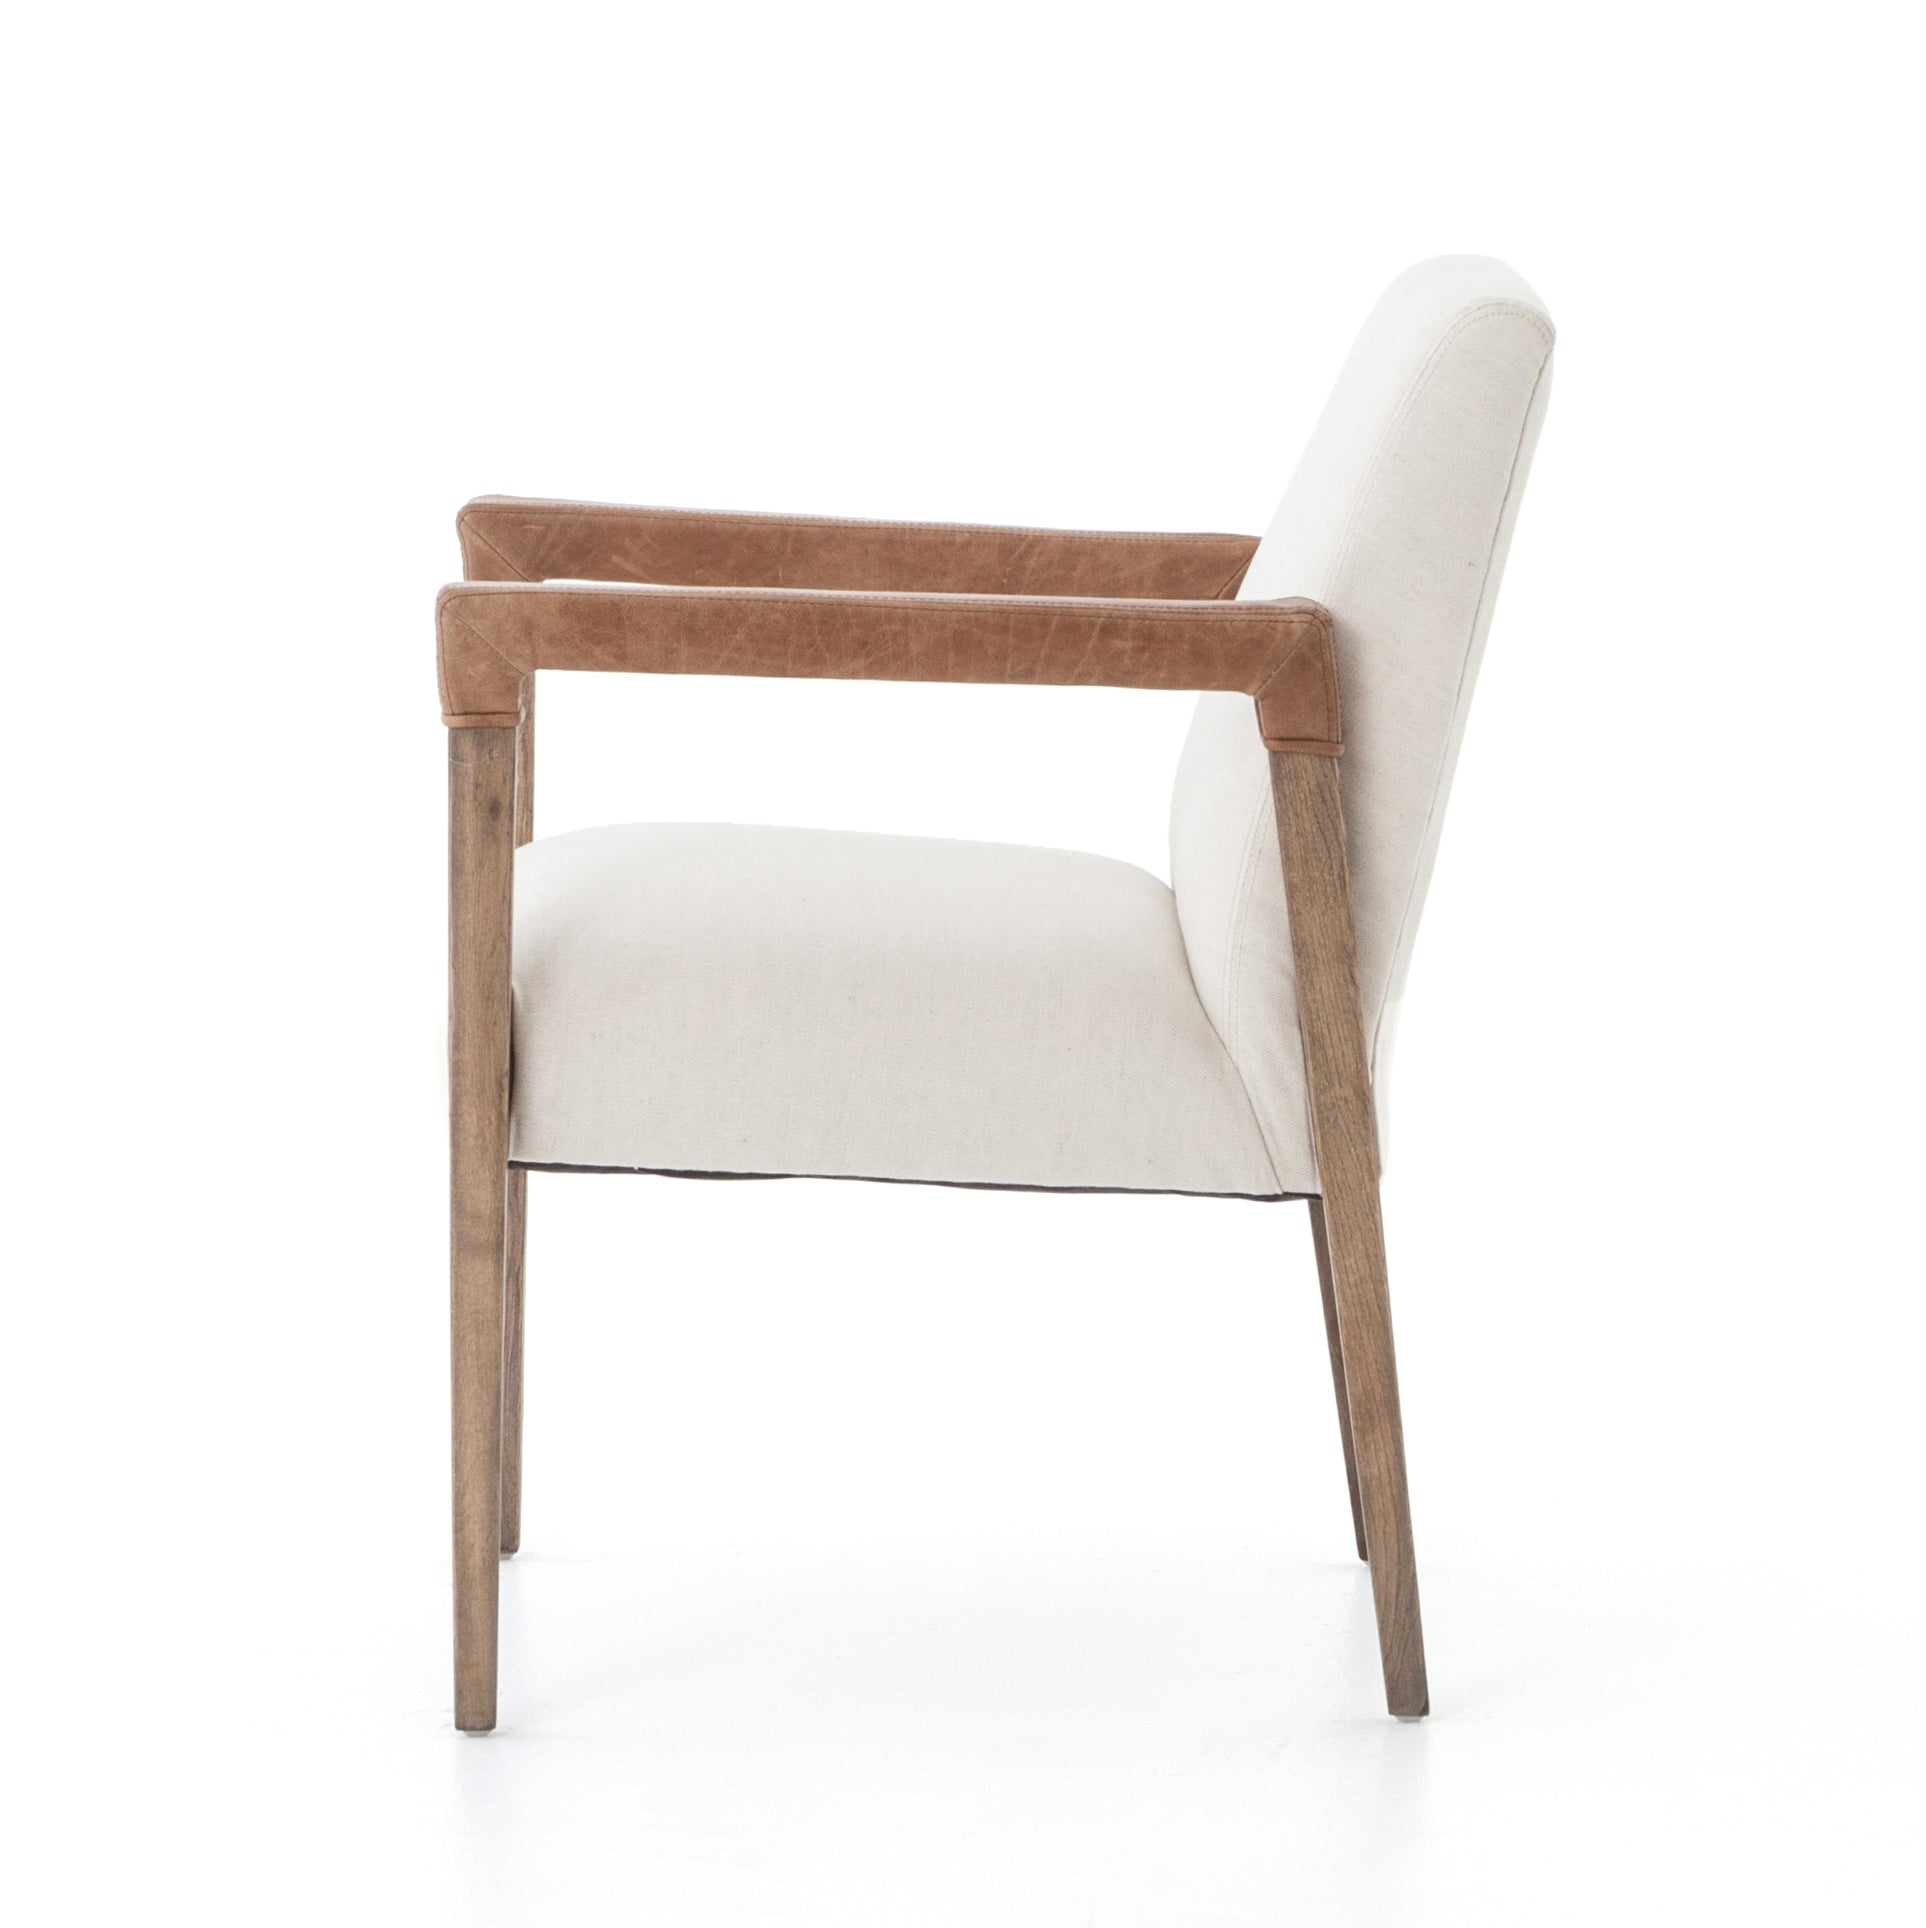 Elegance is no exaggeration with this Reuben Dining Chair - Harbor Natural. Slim, tapered oak with arms wrapped in vintage leather frames a floating seat covered in natural linen. We'd love to see this in your dining room, kitchen, or other space!  Overall Dimensions: 23.25"w x 25.50"d x 33.75"h